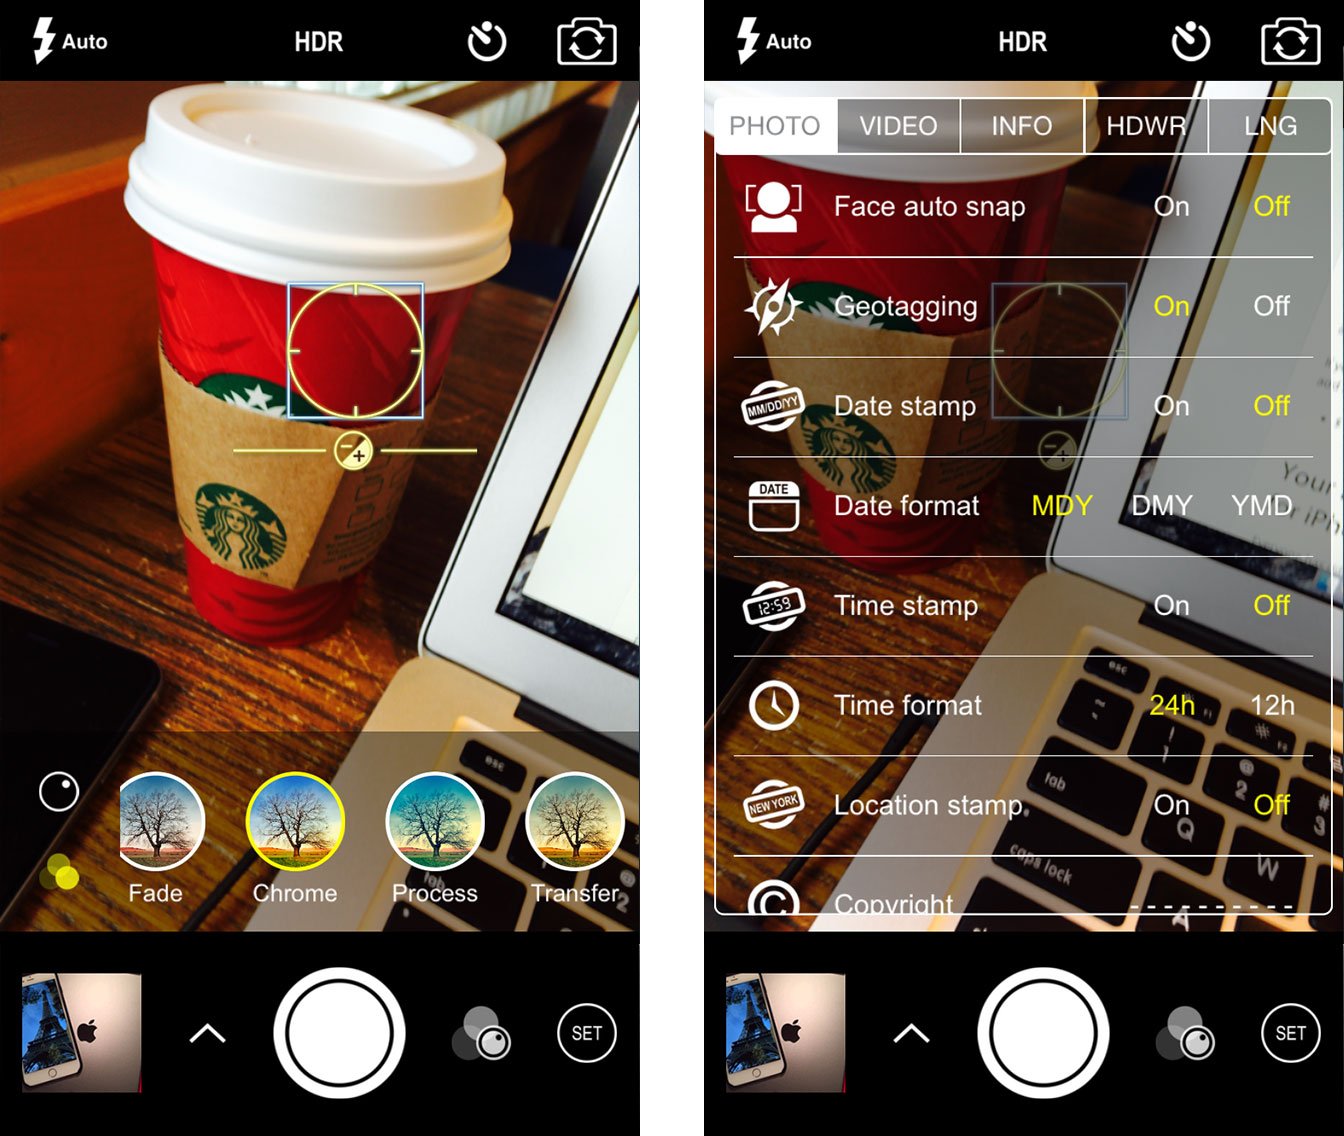 Best camera apps for iPhone: ProCam 2